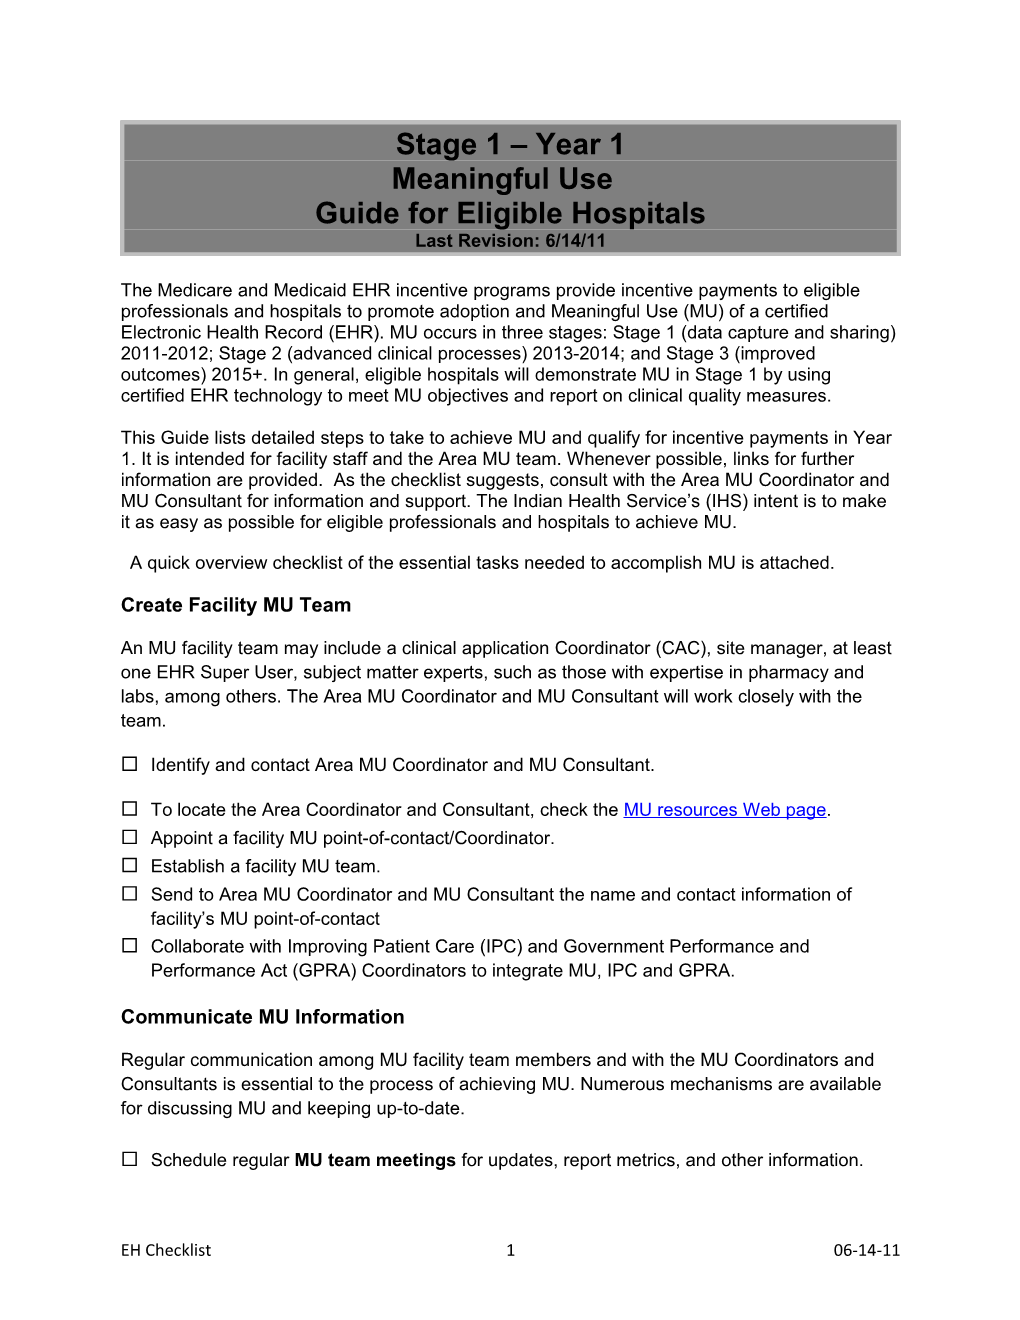 Meaningful Use Guide for Eligible Hospitals